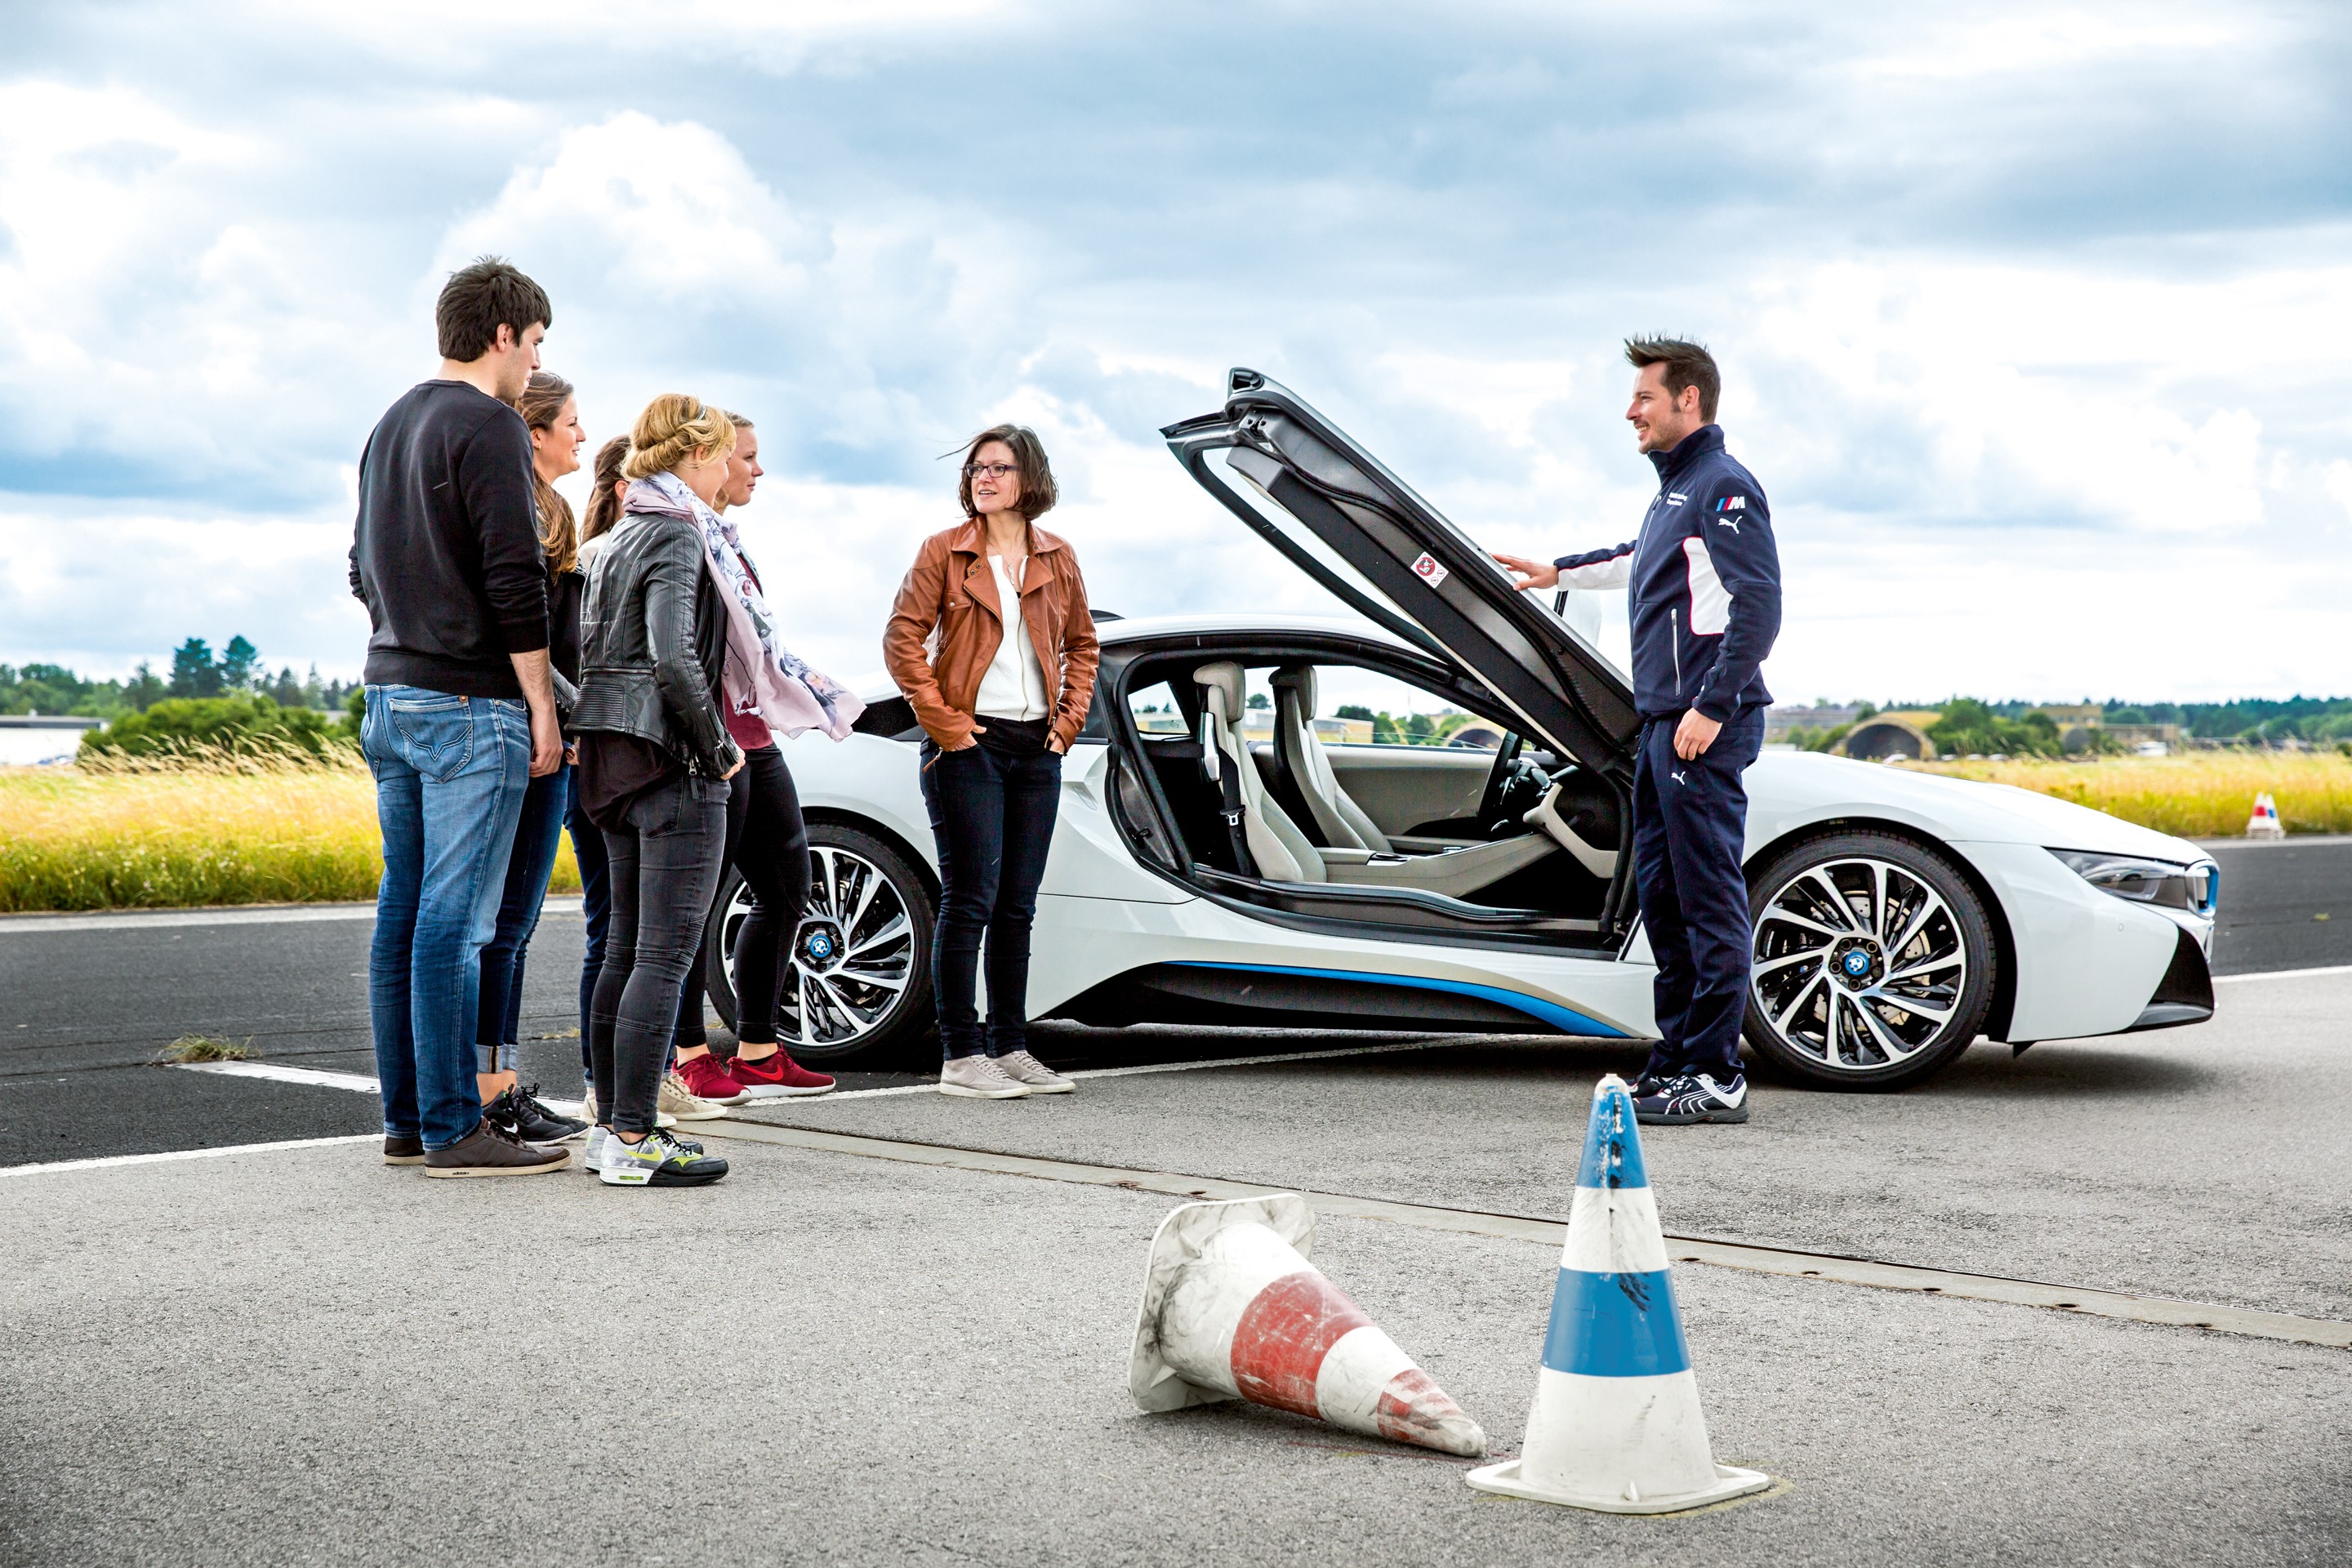 What it's like to drive a 2019 BMW i8 to an elementary school career day